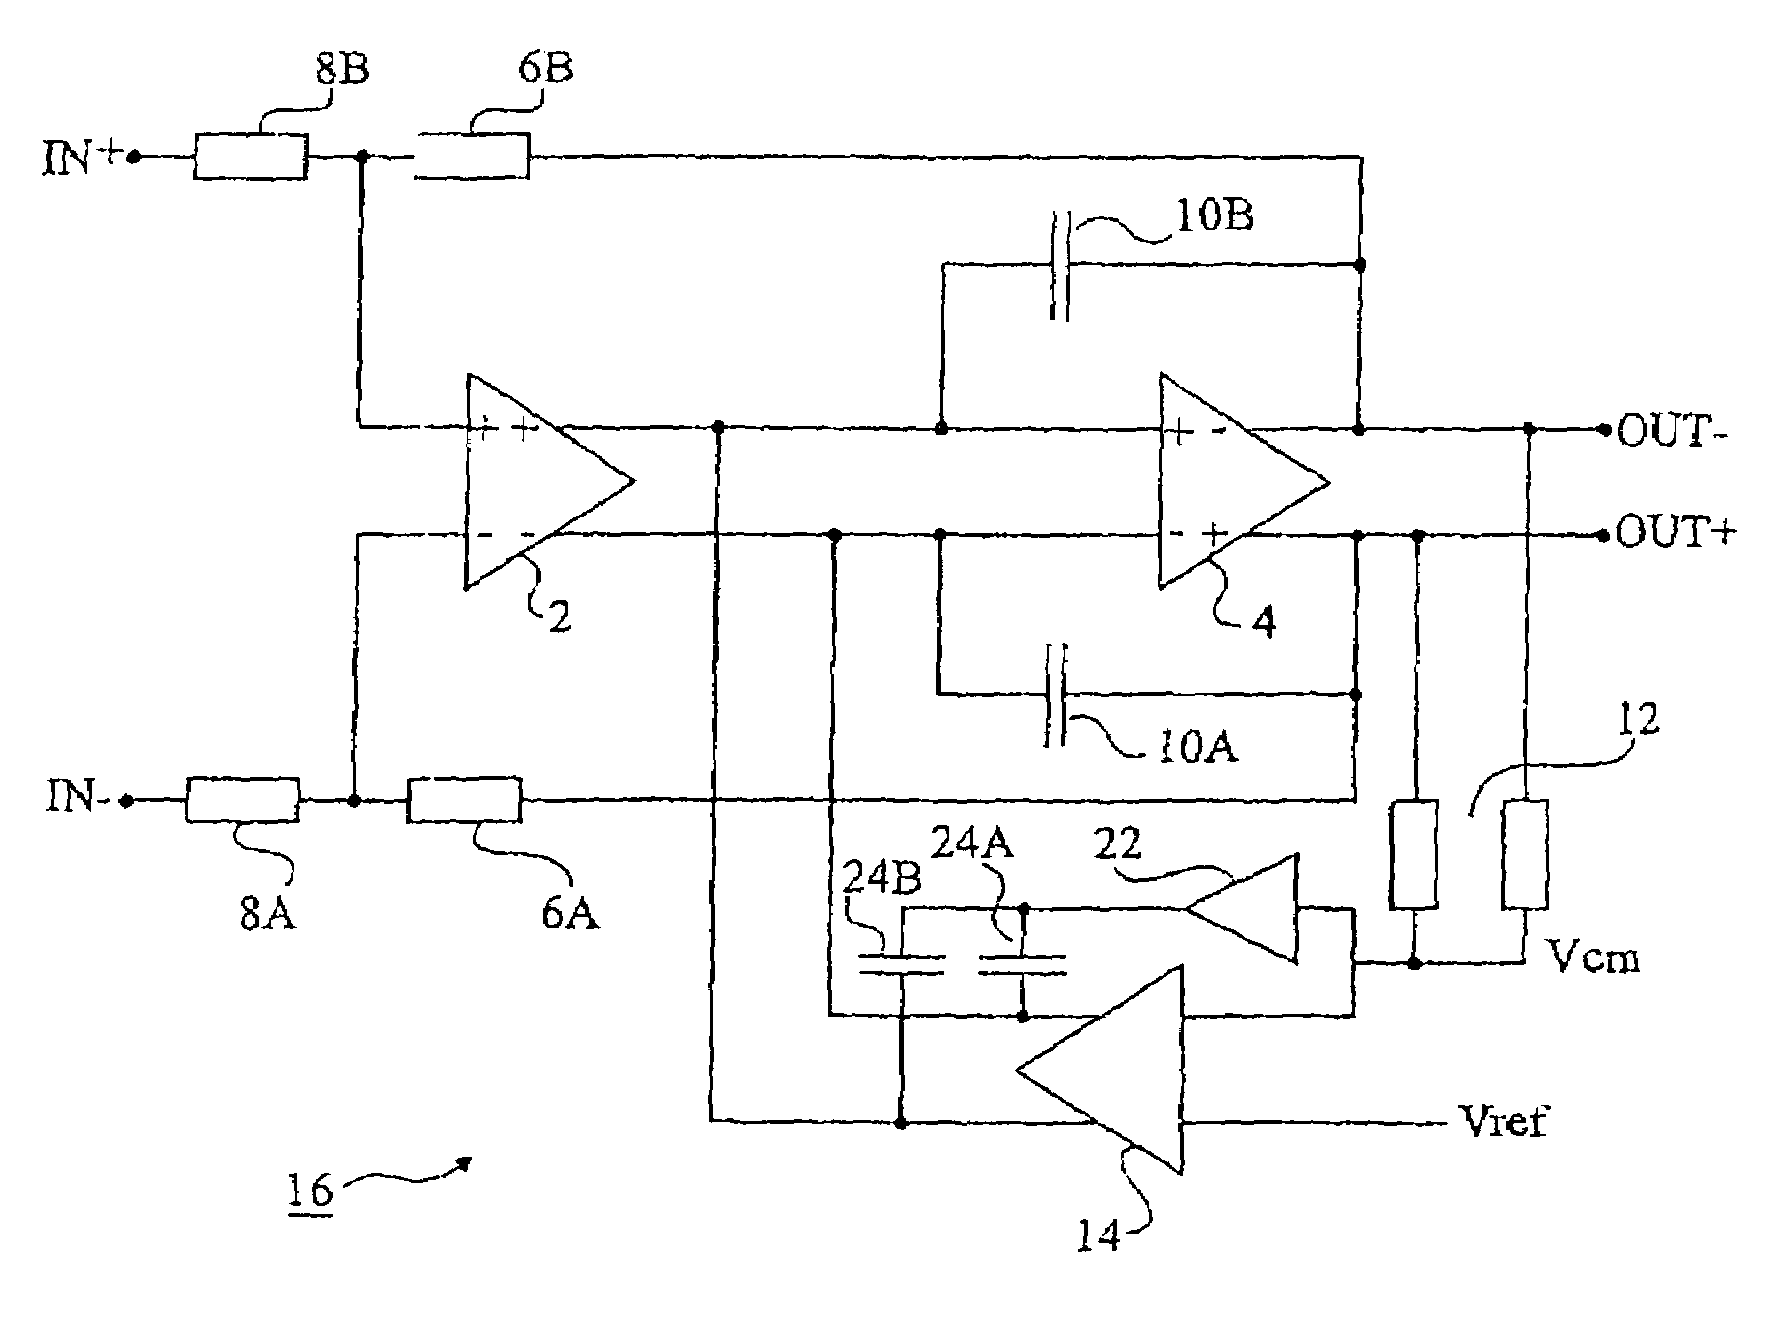 Differential amplifier with a common mode voltage loop